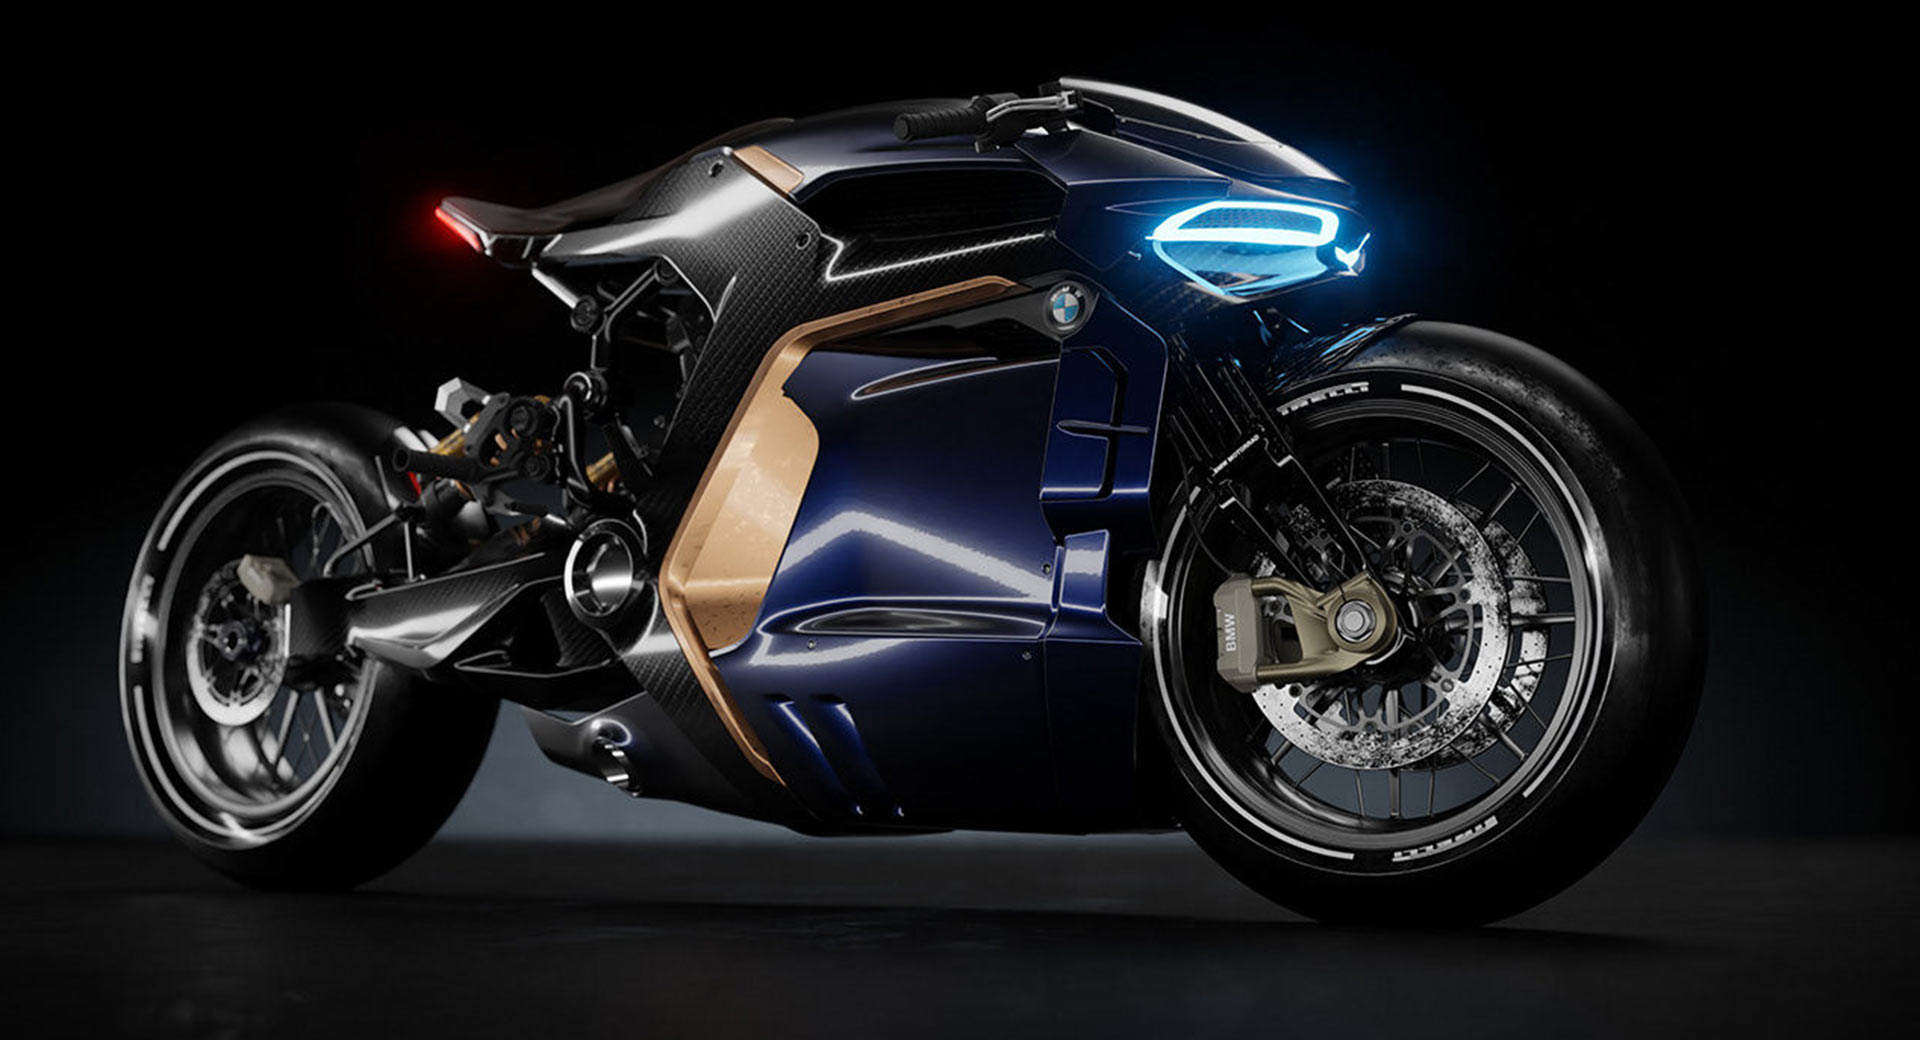 BMW Motorcycle Concept Might Look Uncomfortable To Ride But It Sure ...